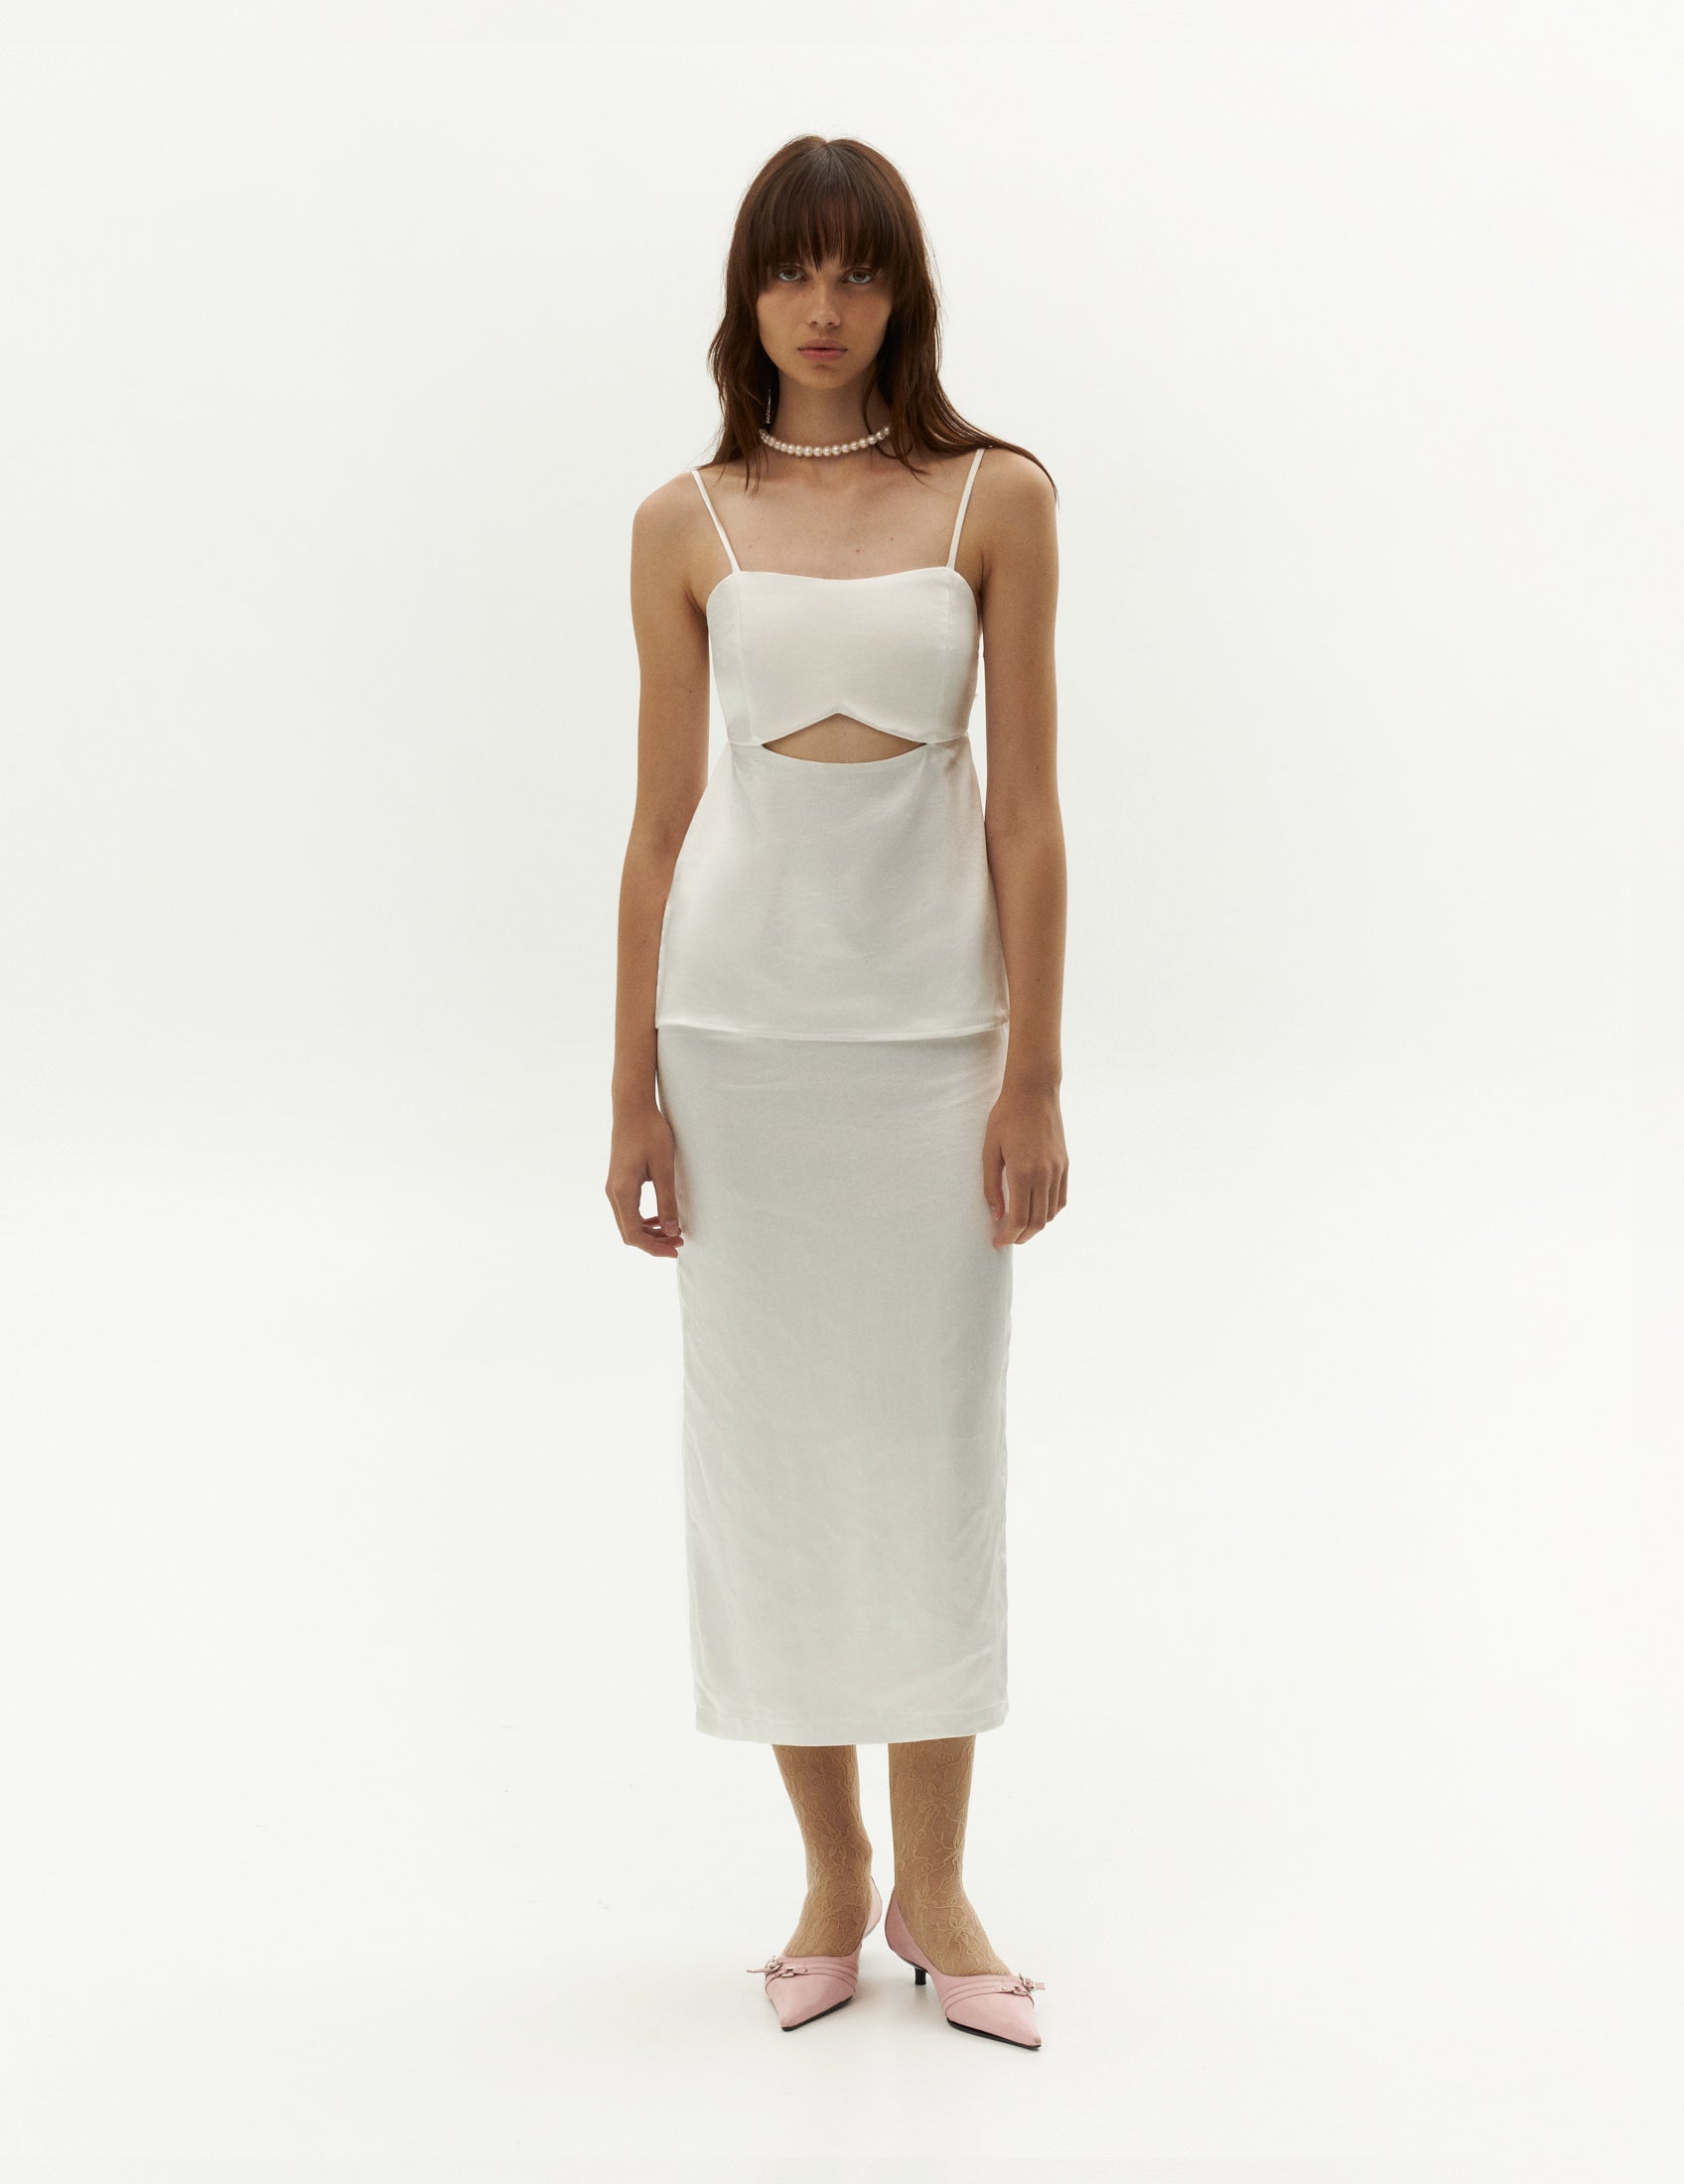 silky white suit skirt and top, clothing brand FORMA